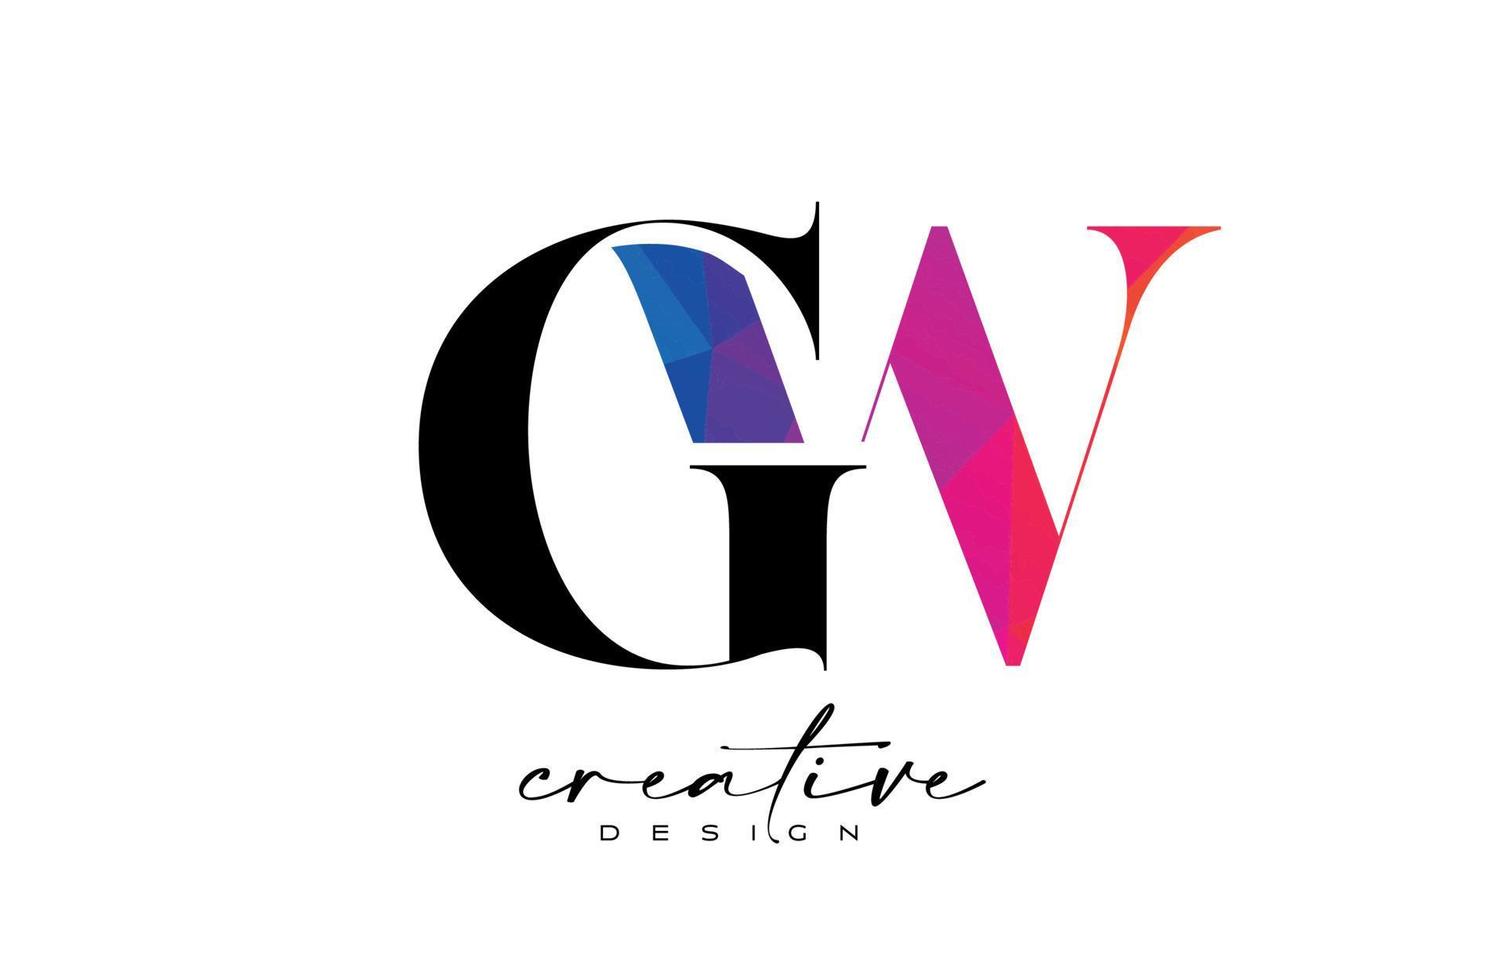 GW Letter Design with Creative Cut and Colorful Rainbow Texture vector